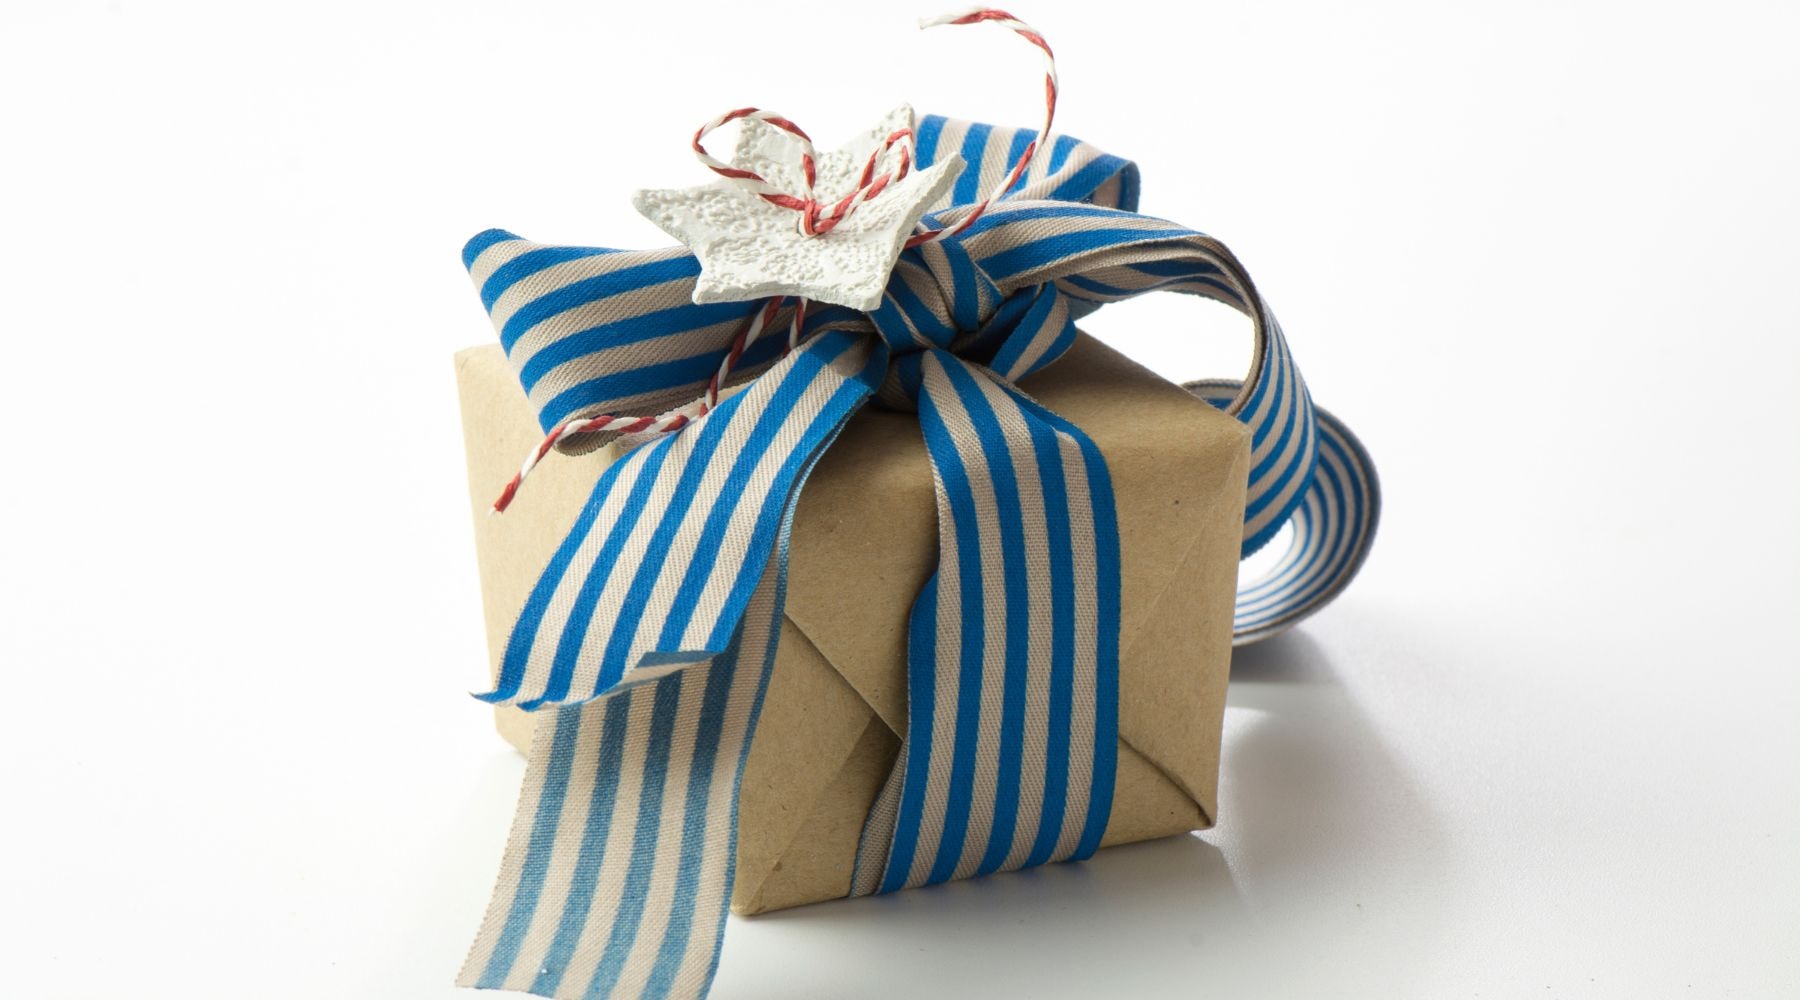 Craft paper gift wrapped with a blue striped ribbon and ceramic star decoration.